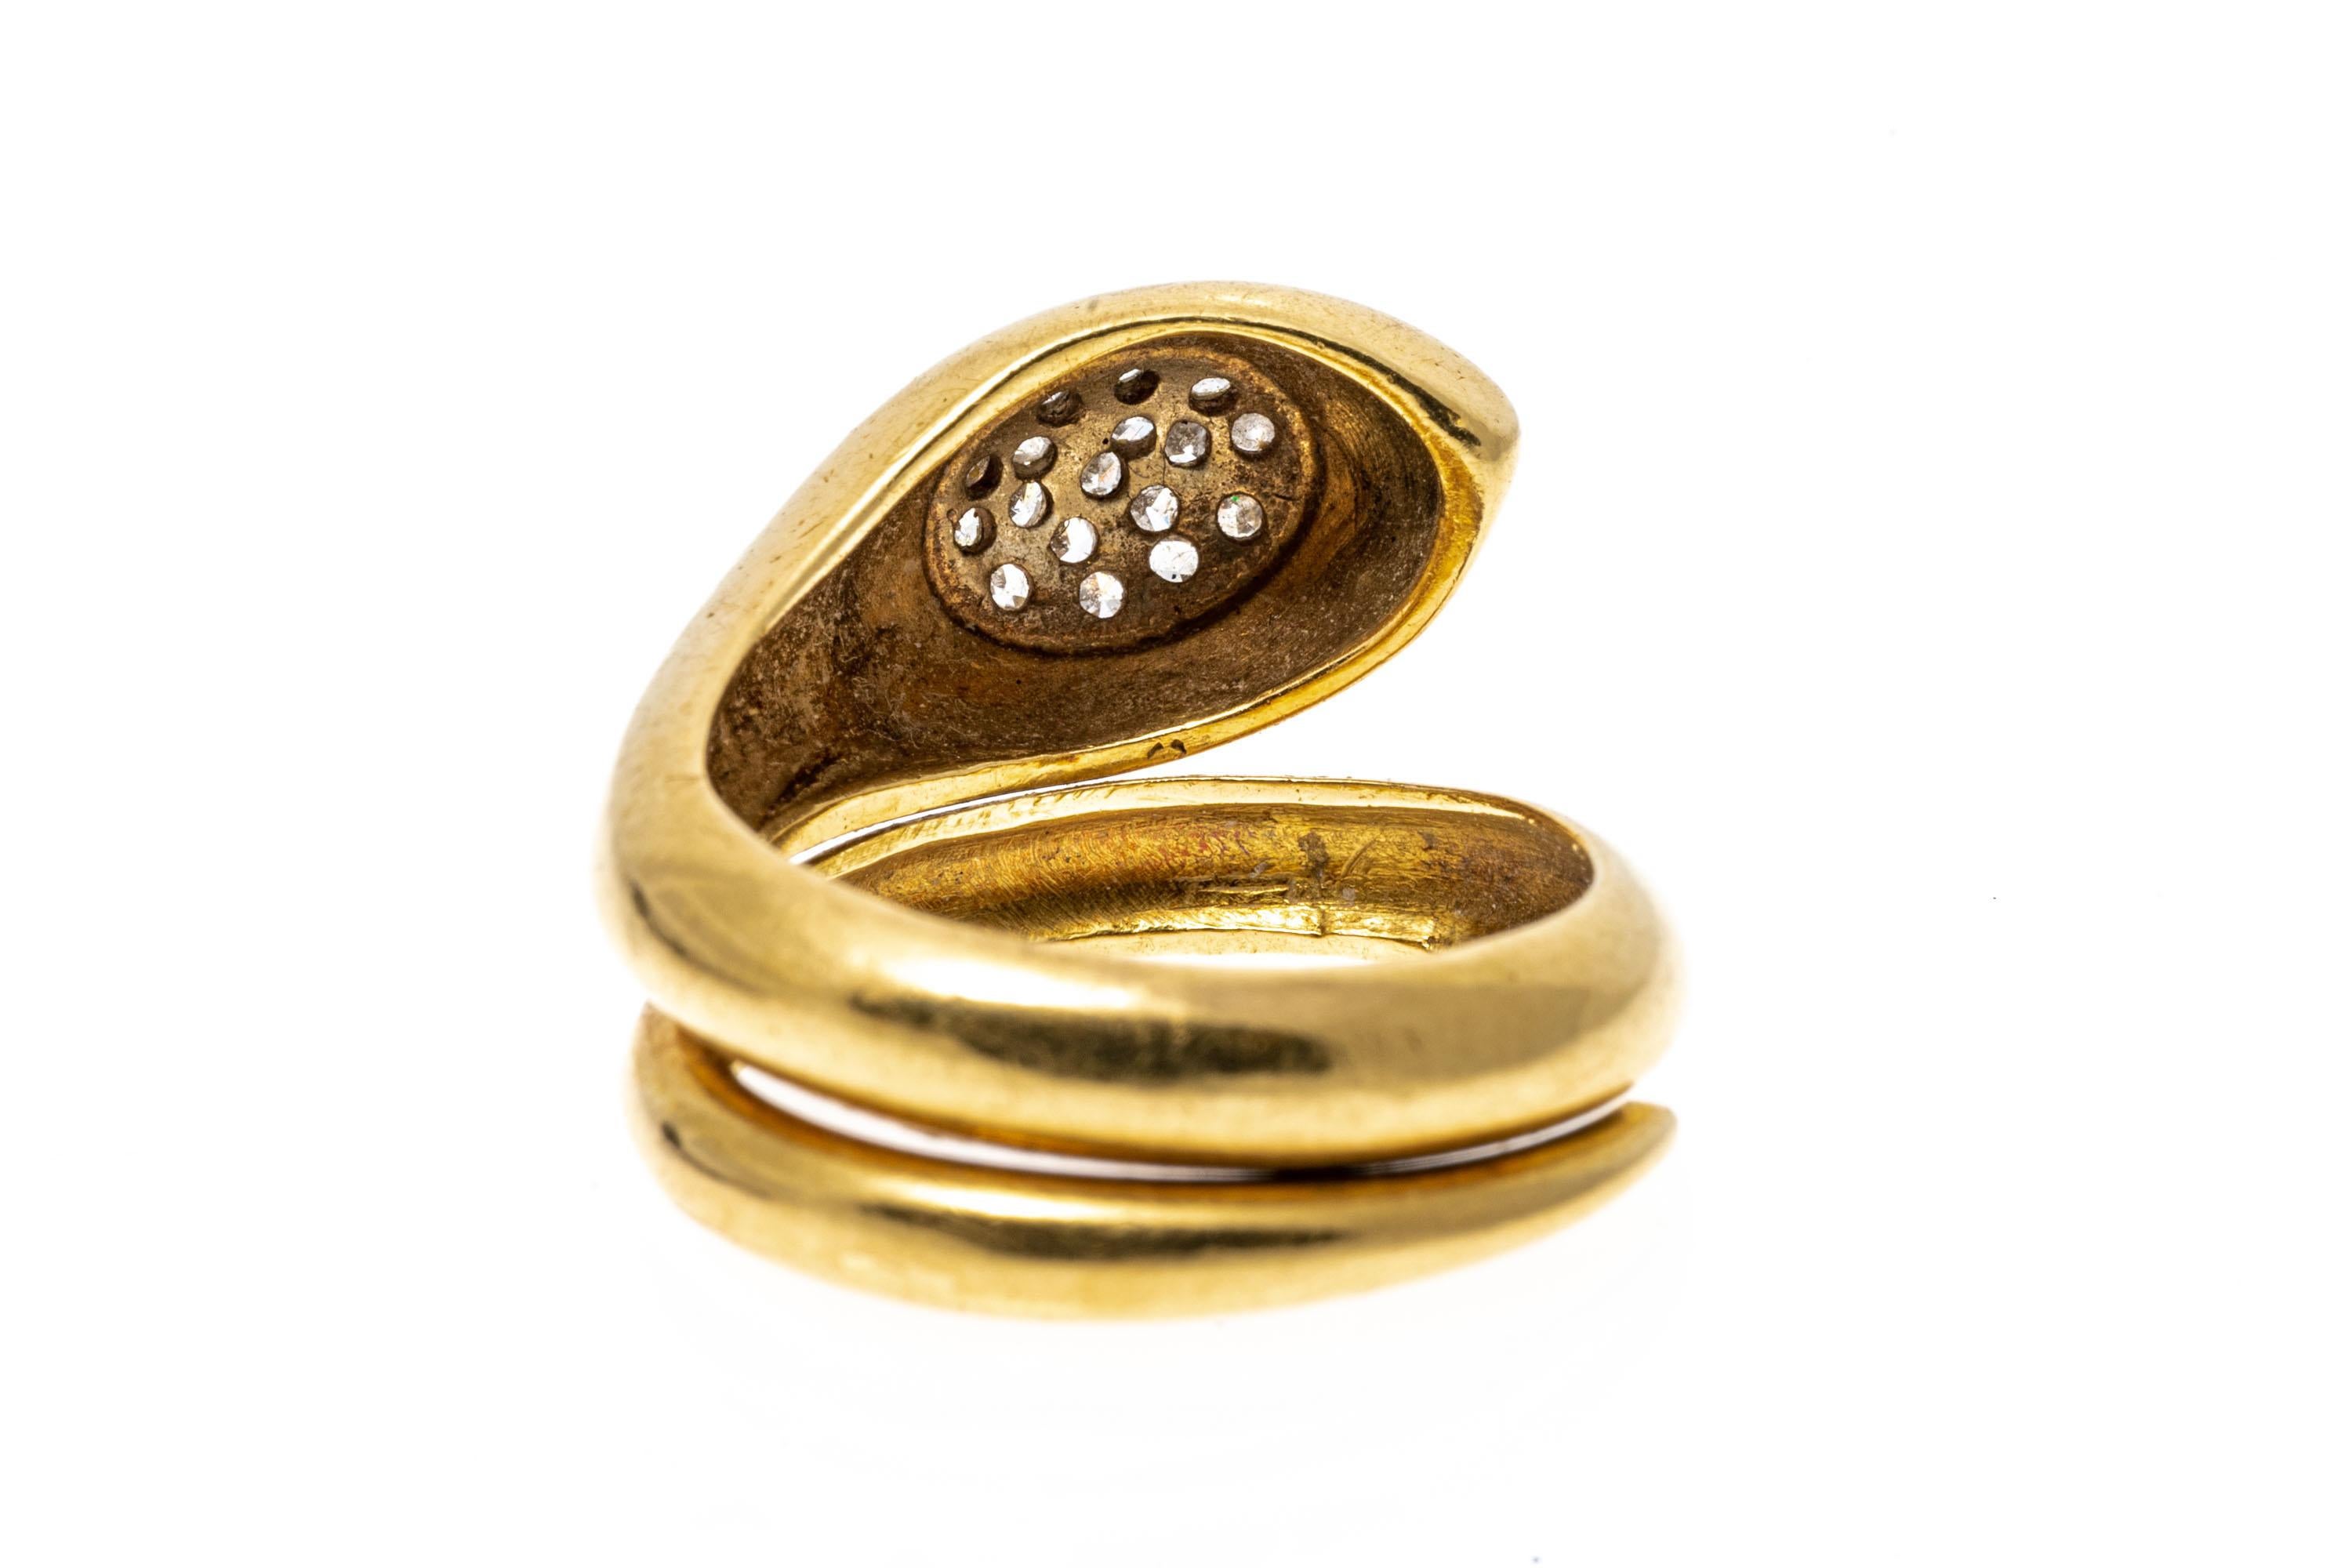 Contemporary 14k Gold Single Coiled Serpent Ring with Pave Set Diamond Head